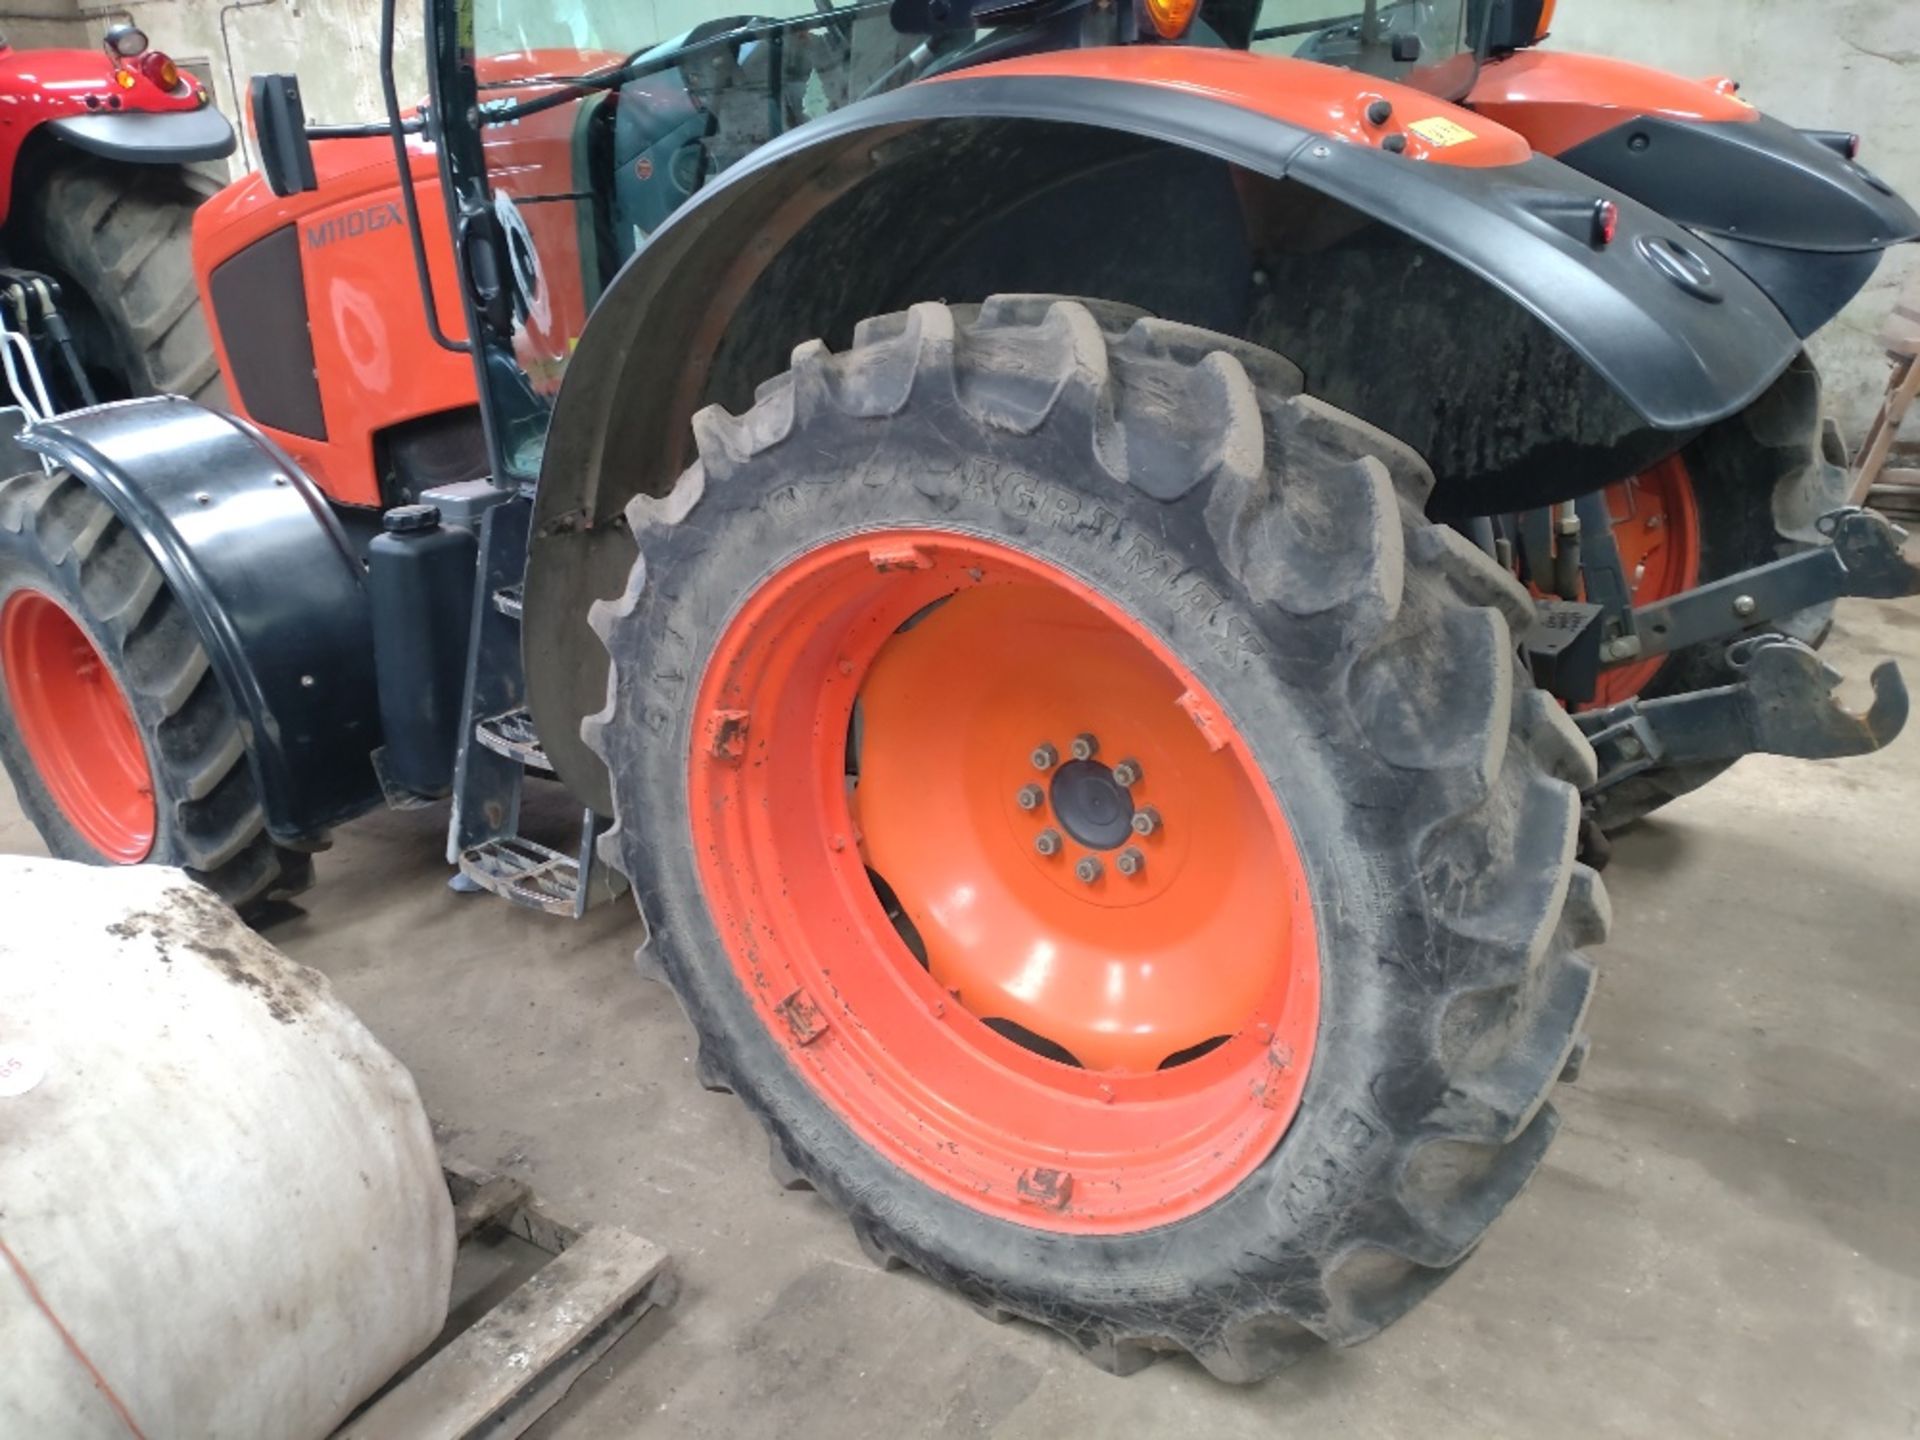 2015 Kubota M110GX 4 wd tractor, reg FJ64 EHO, 1571 hours, 340/85 R 38 rear wheels and tyres, - Image 11 of 15